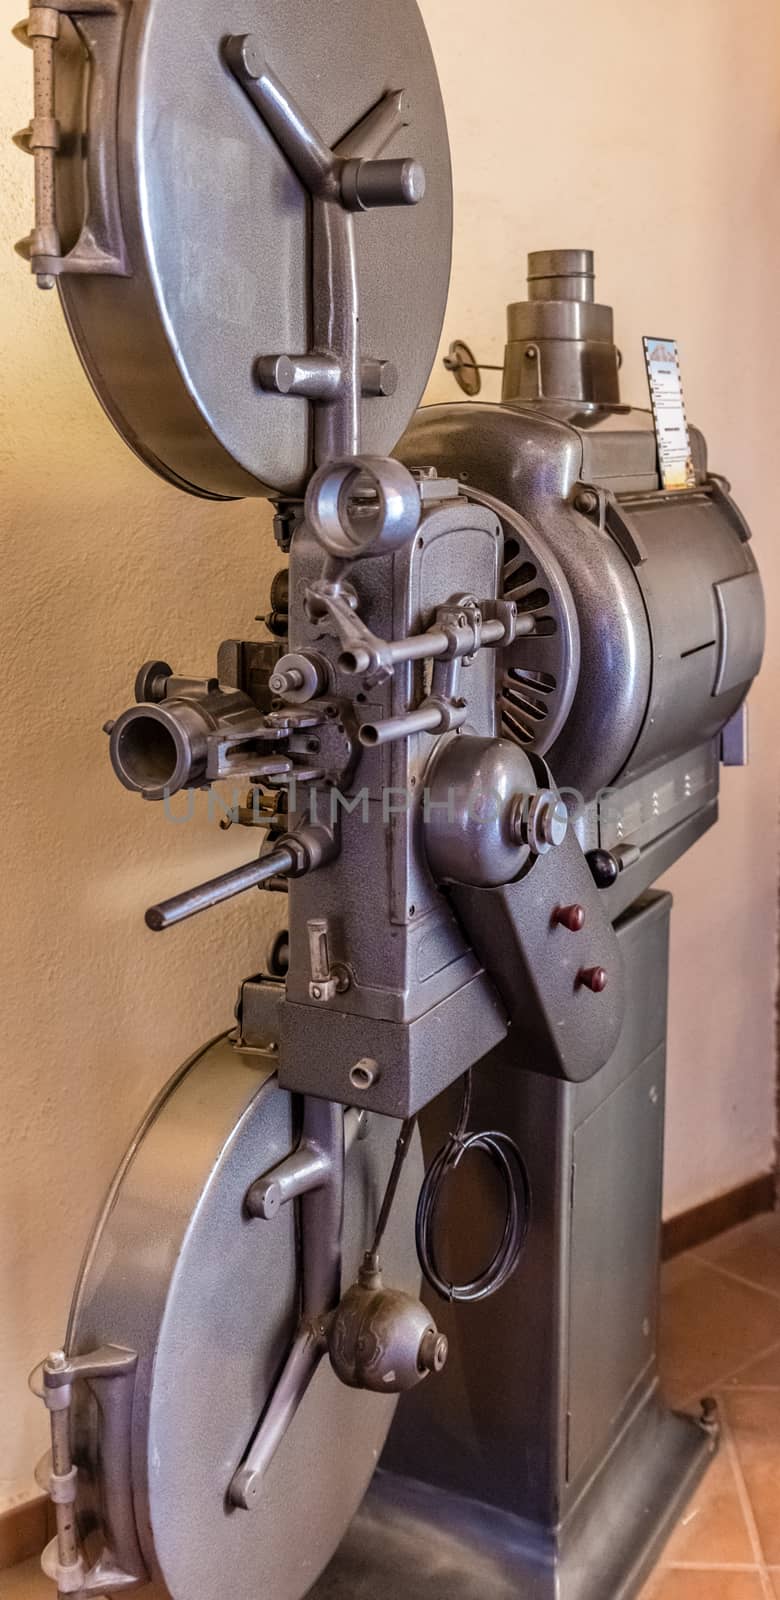 Old movie projector for cinema. Vintage movie camera keep in museum. It is use with retro film. But the body is classic design. The vintage cinema projector is analog and difficult to use it.